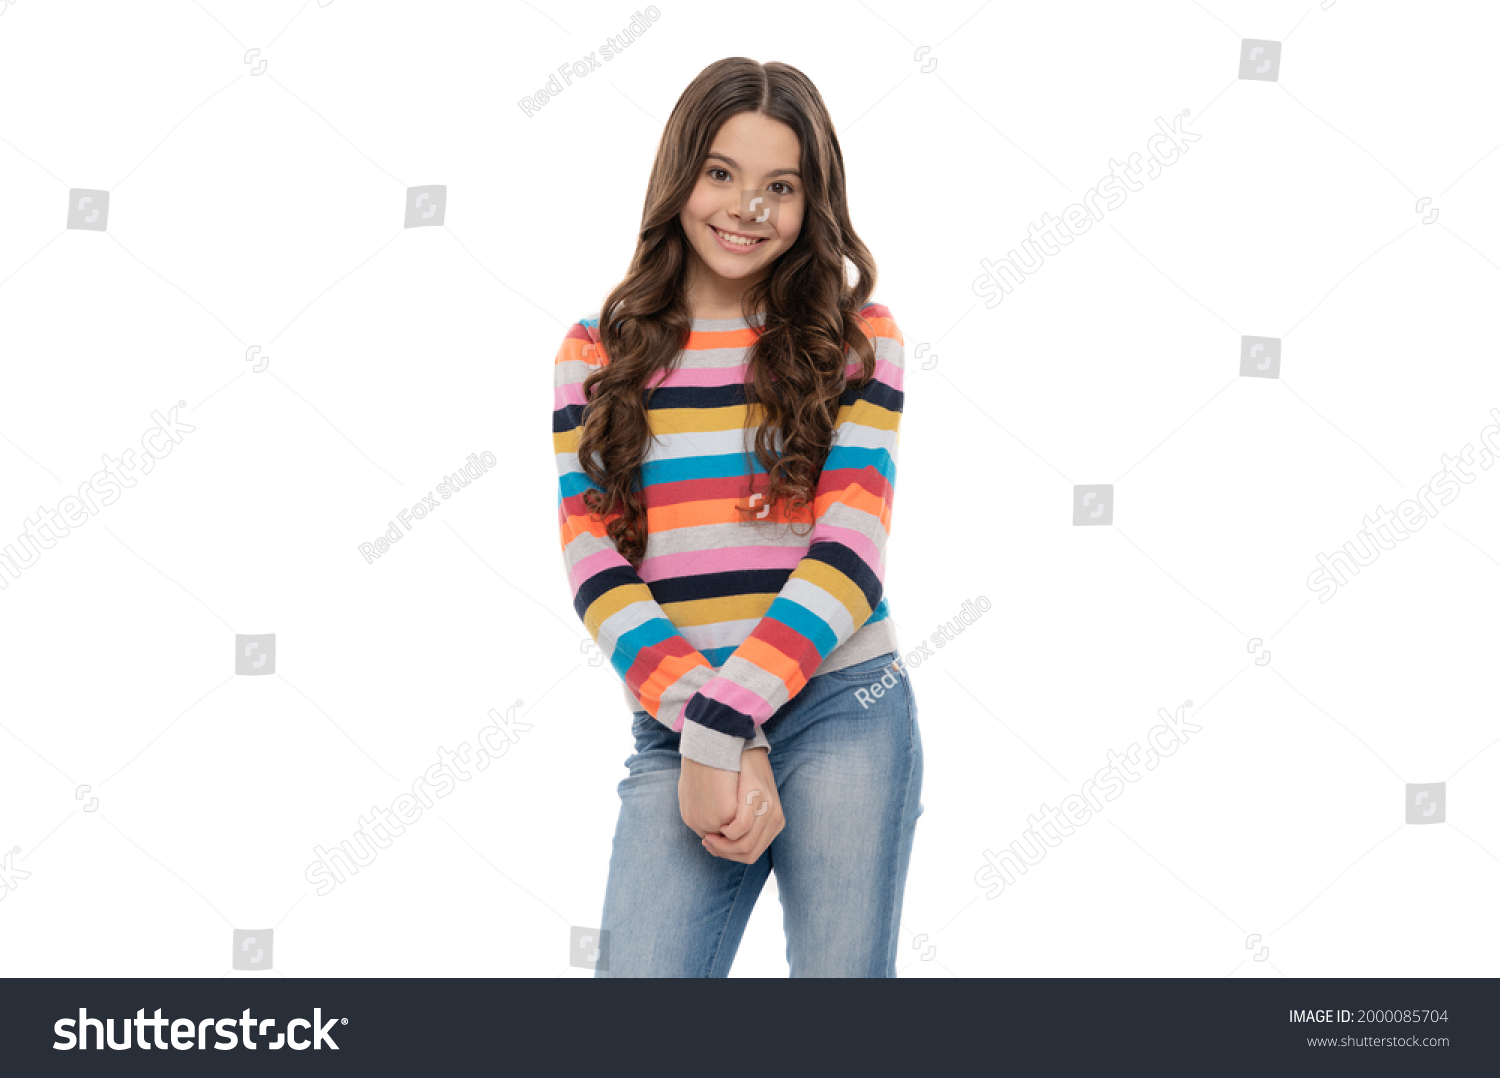 5,853 Tween fashion Stock Photos, Images & Photography | Shutterstock